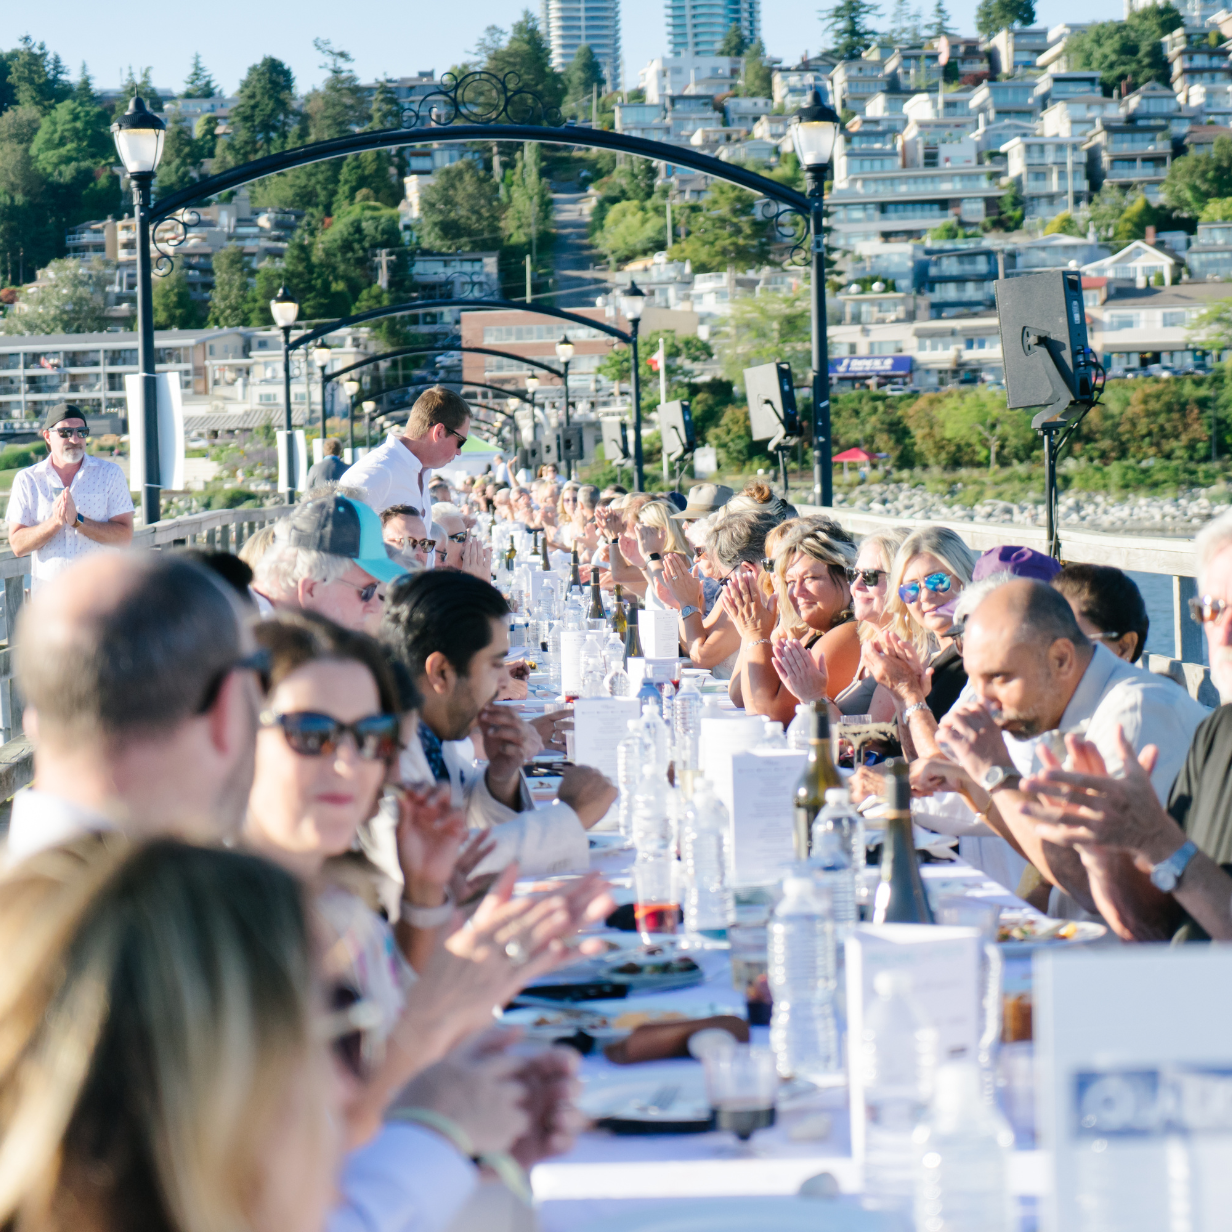 Picnic on the Pier raises $100,000+ for Peace Arch Hospital Foundation